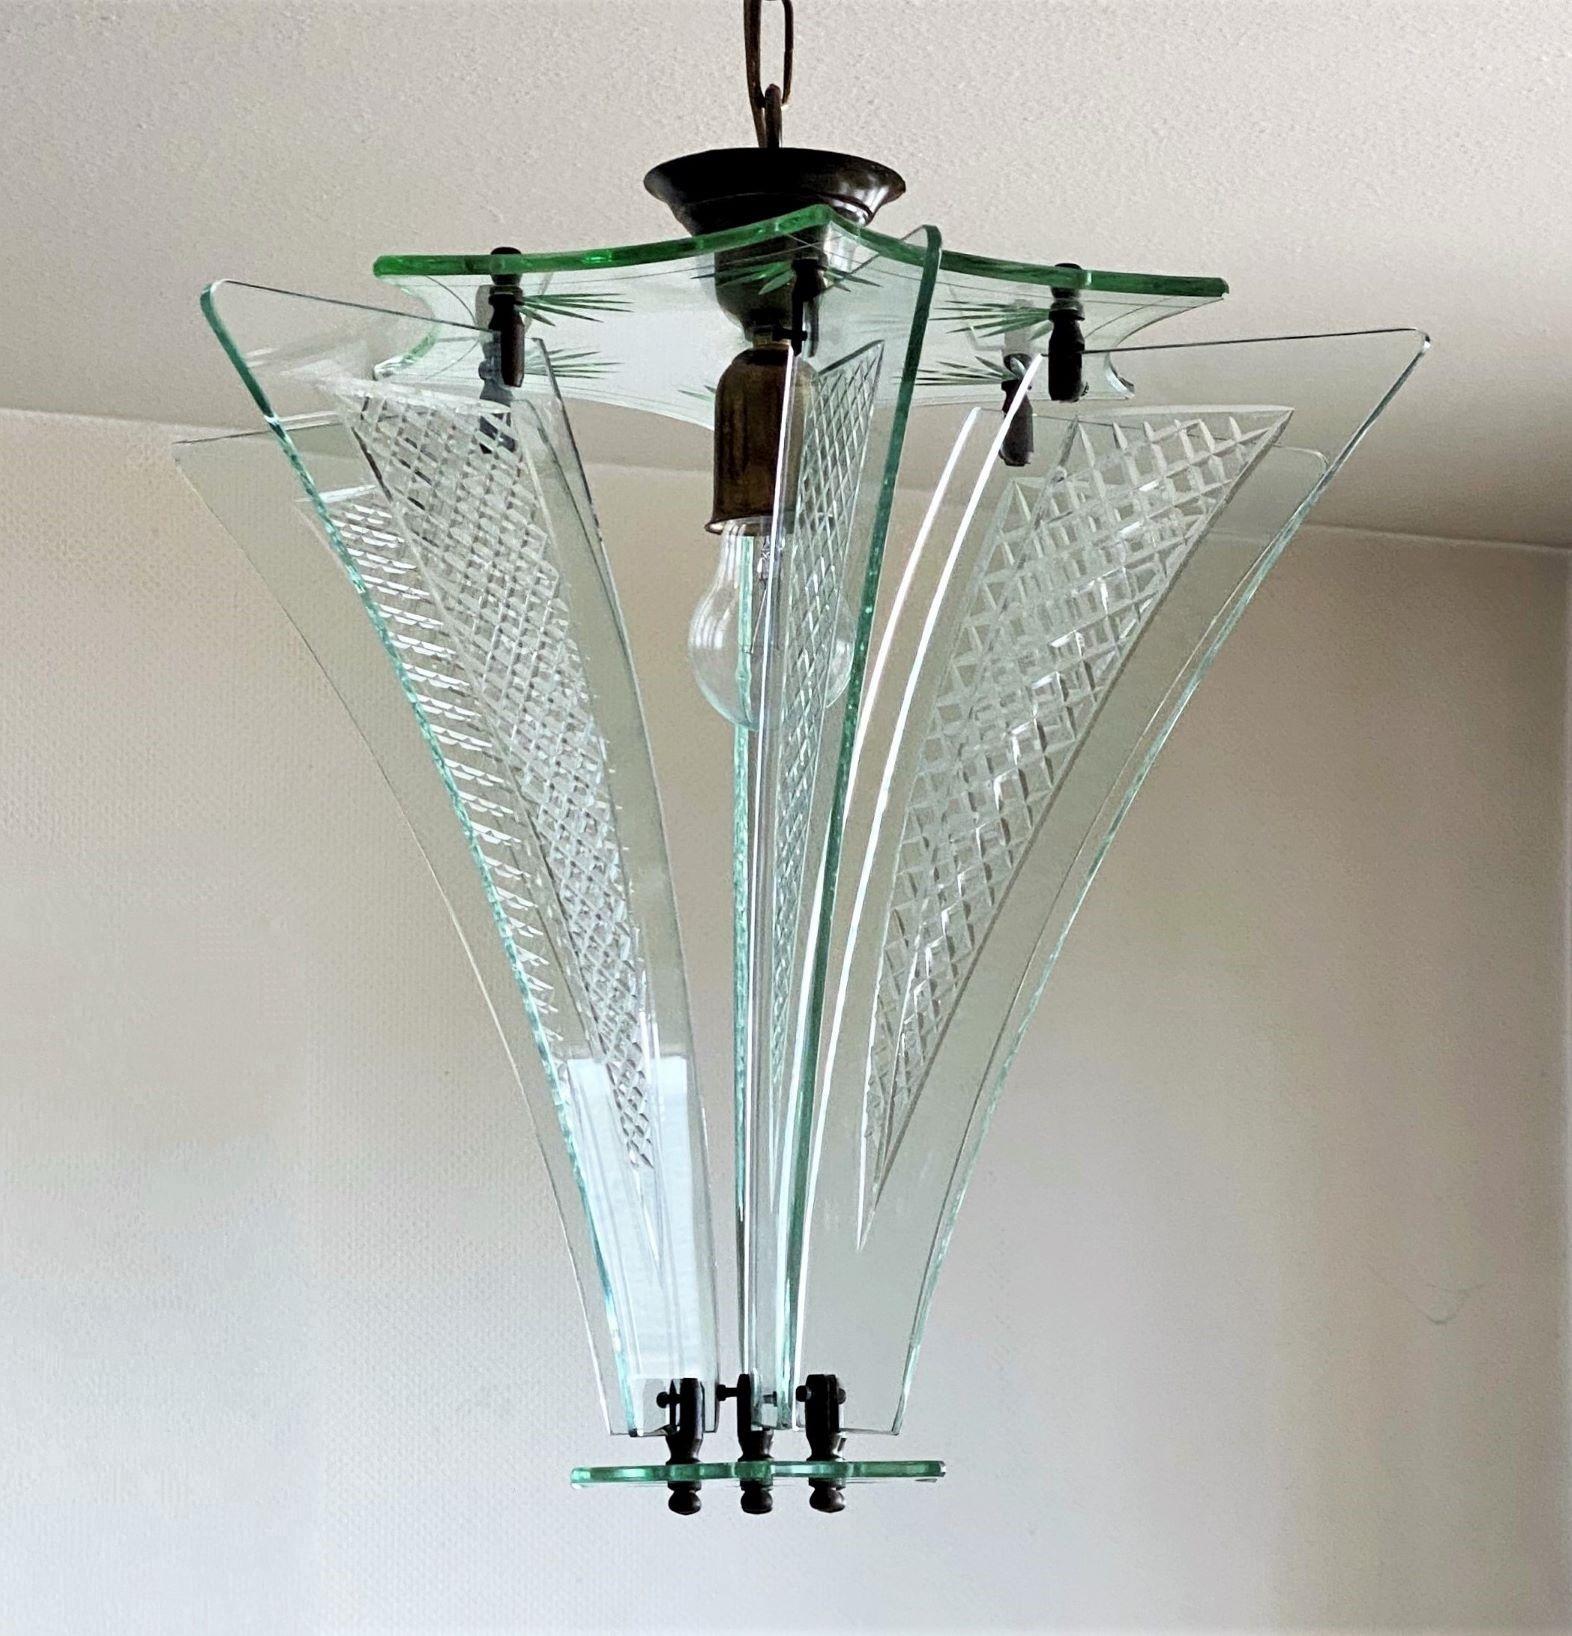 Rare and exceptional hand blown Murano ultra clear cut glass pendant or lantern by Fontana Arte, Italy, 1950s. This fixture is composed by six beveled glass panels with elegant cut pattern fitting to two cut glass disks forming a star design, brass